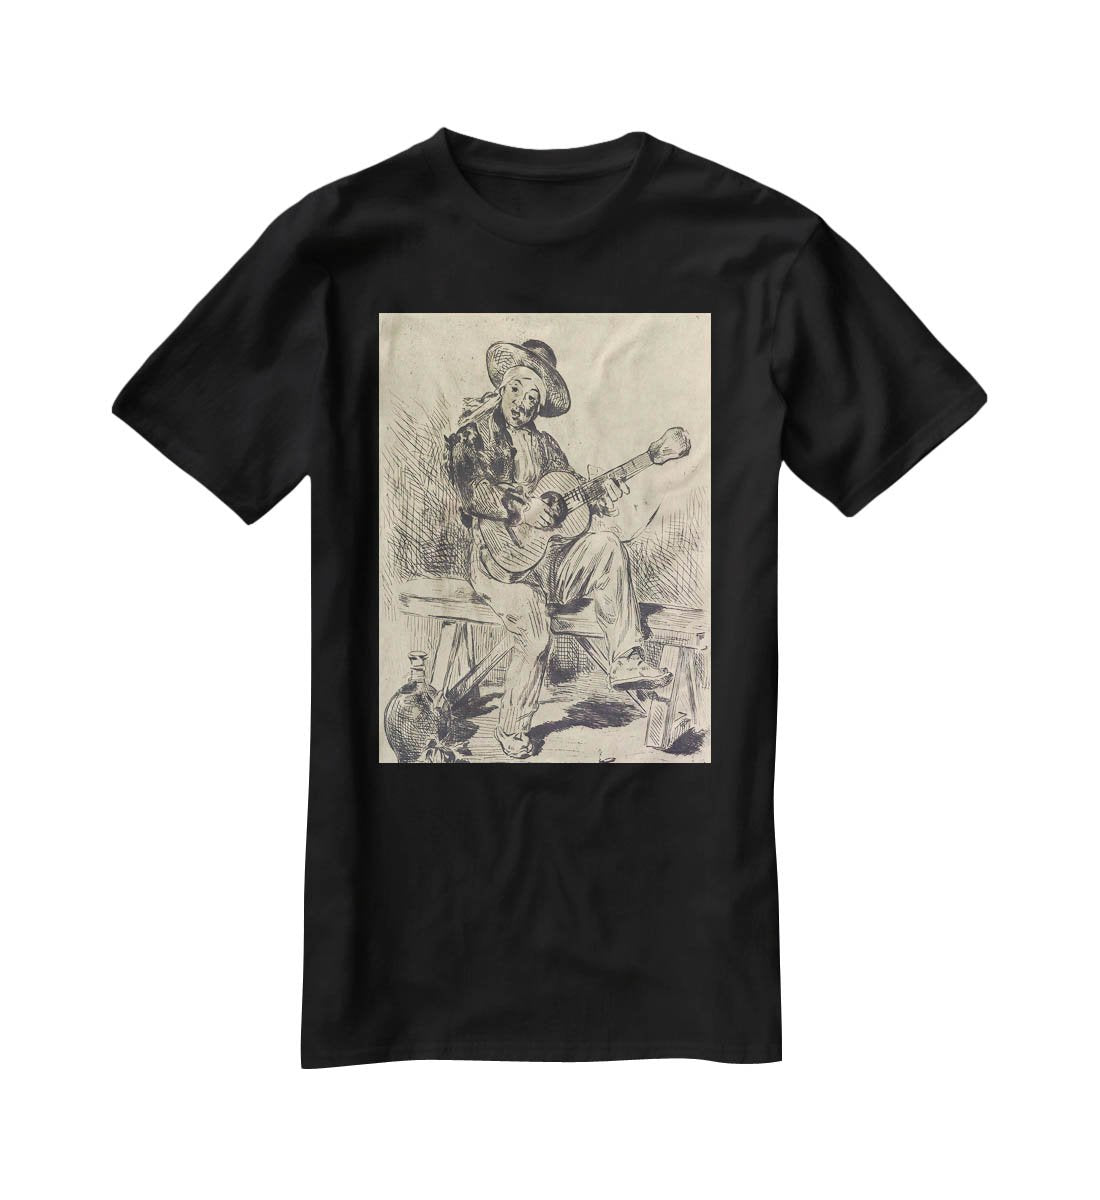 The guitar Player by Manet T-Shirt - Canvas Art Rocks - 1